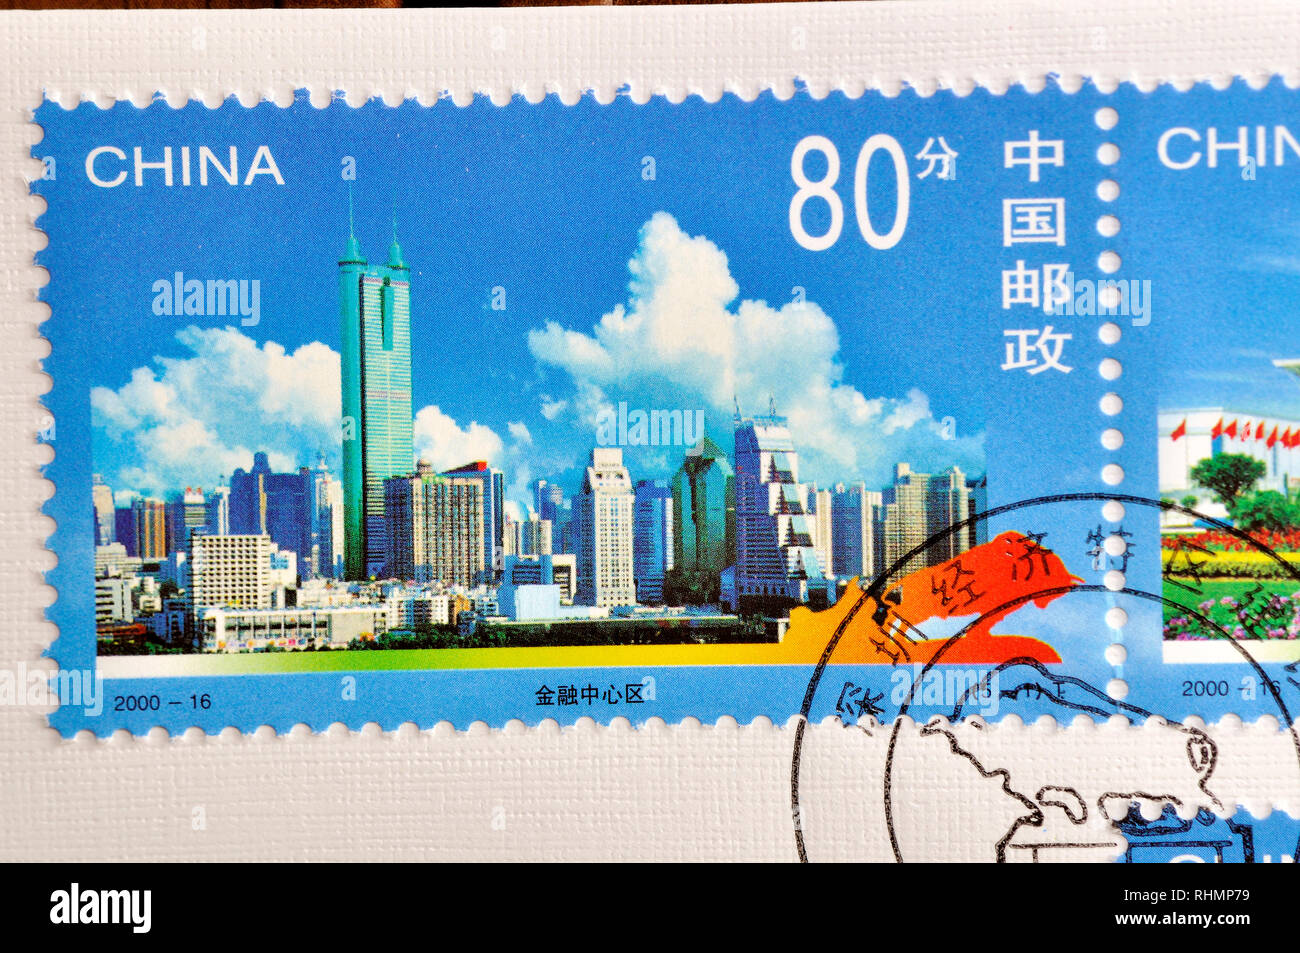 CHINA - CIRCA 2000: A stamp printed in China shows 2000-16 Construction of the Shenzhen Special Economic Zone, circa 2000., circa 2000 Stock Photo